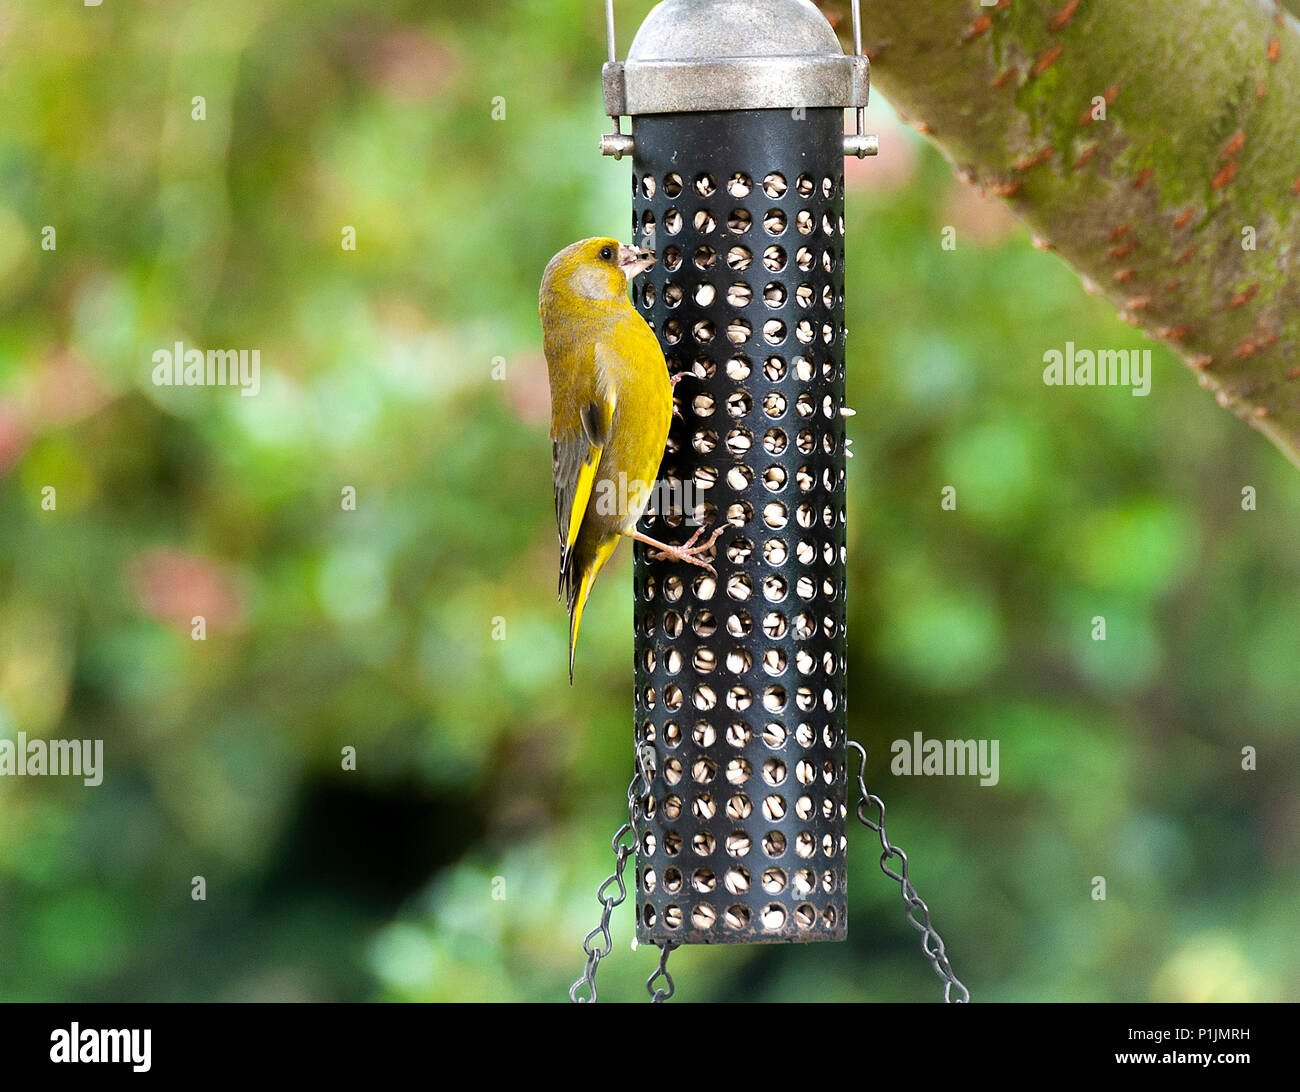 An Adult Male Greenfinch Eating Sunflower Hearts from a Bird Feeder Hanging in a Garden in Alsager Cheshire England United Kingdom UK Stock Photo